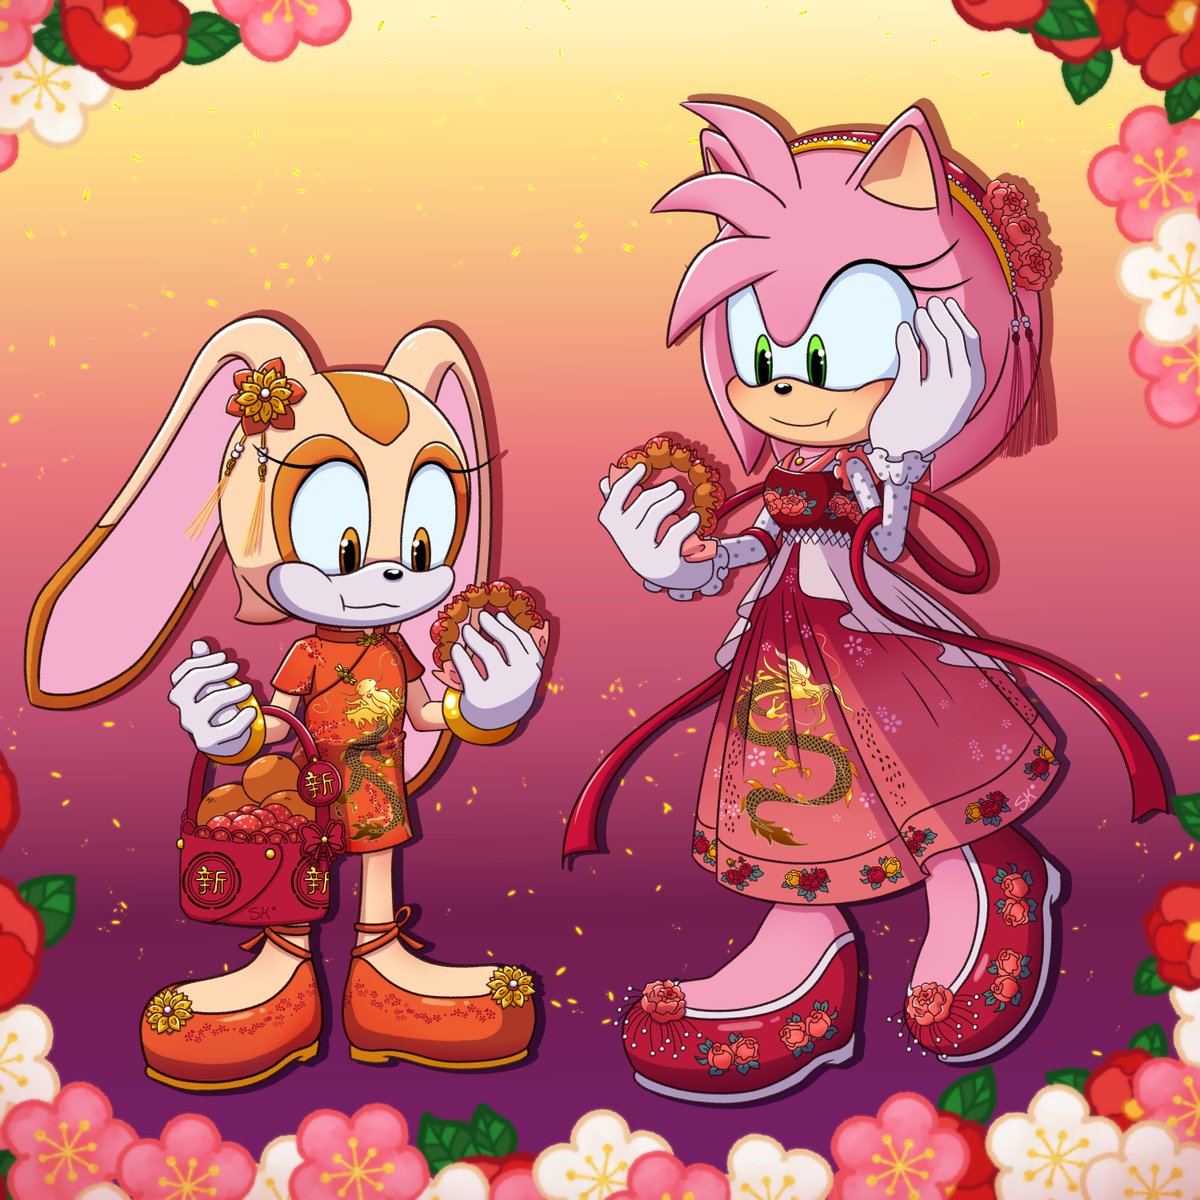 Dragon Lunar New Year 🏮✨

Submission for @sonicclub Lunar Event🥰Join us for more events on Discord!
#amyrose #CreamTheRabbit #sonic